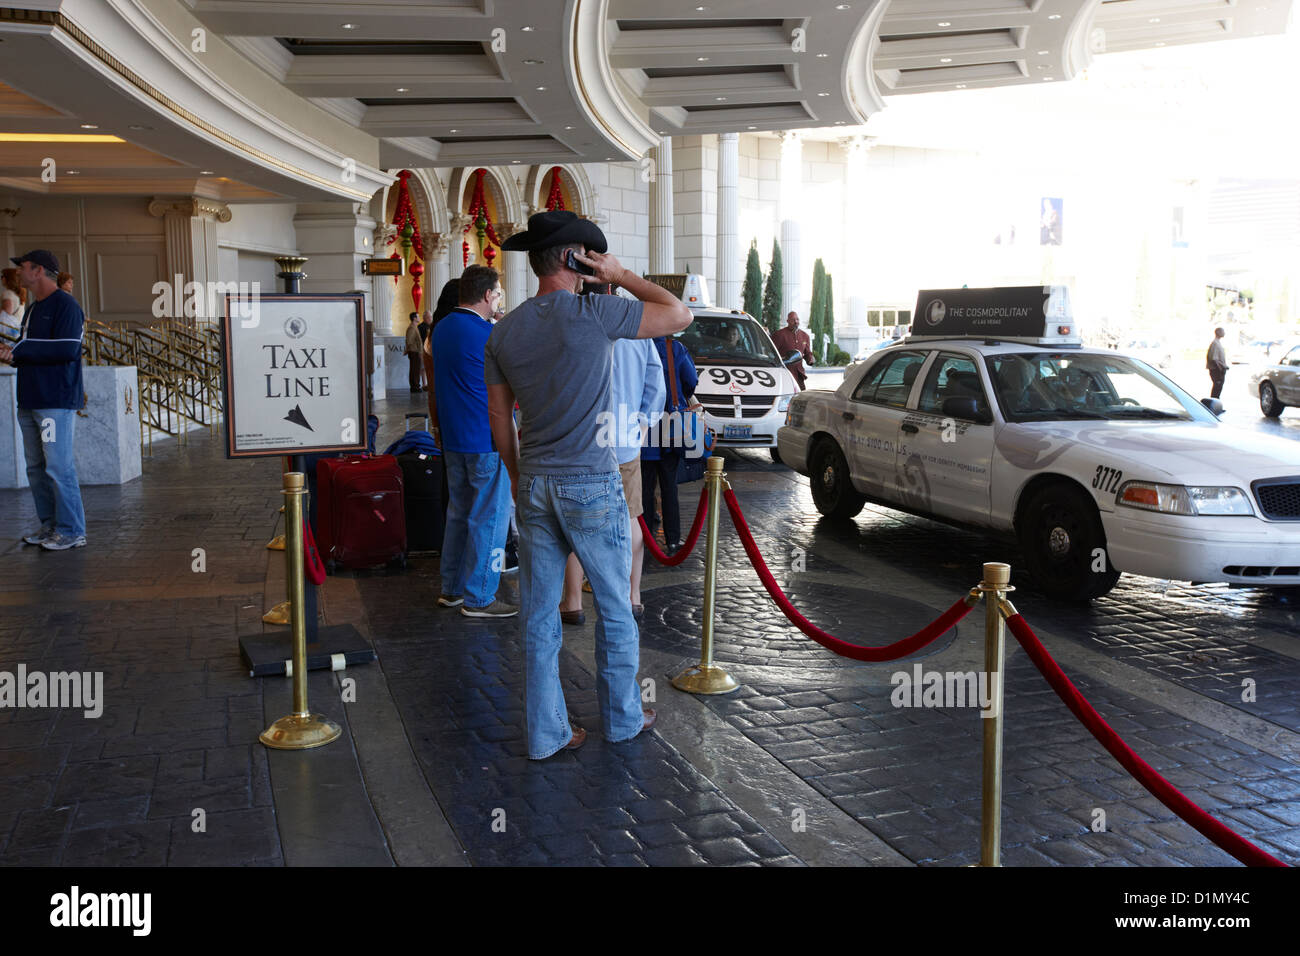 people queuing waiting in line for taxis at caesars palace luxury hotel and casino Las Vegas Nevada USA Stock Photo